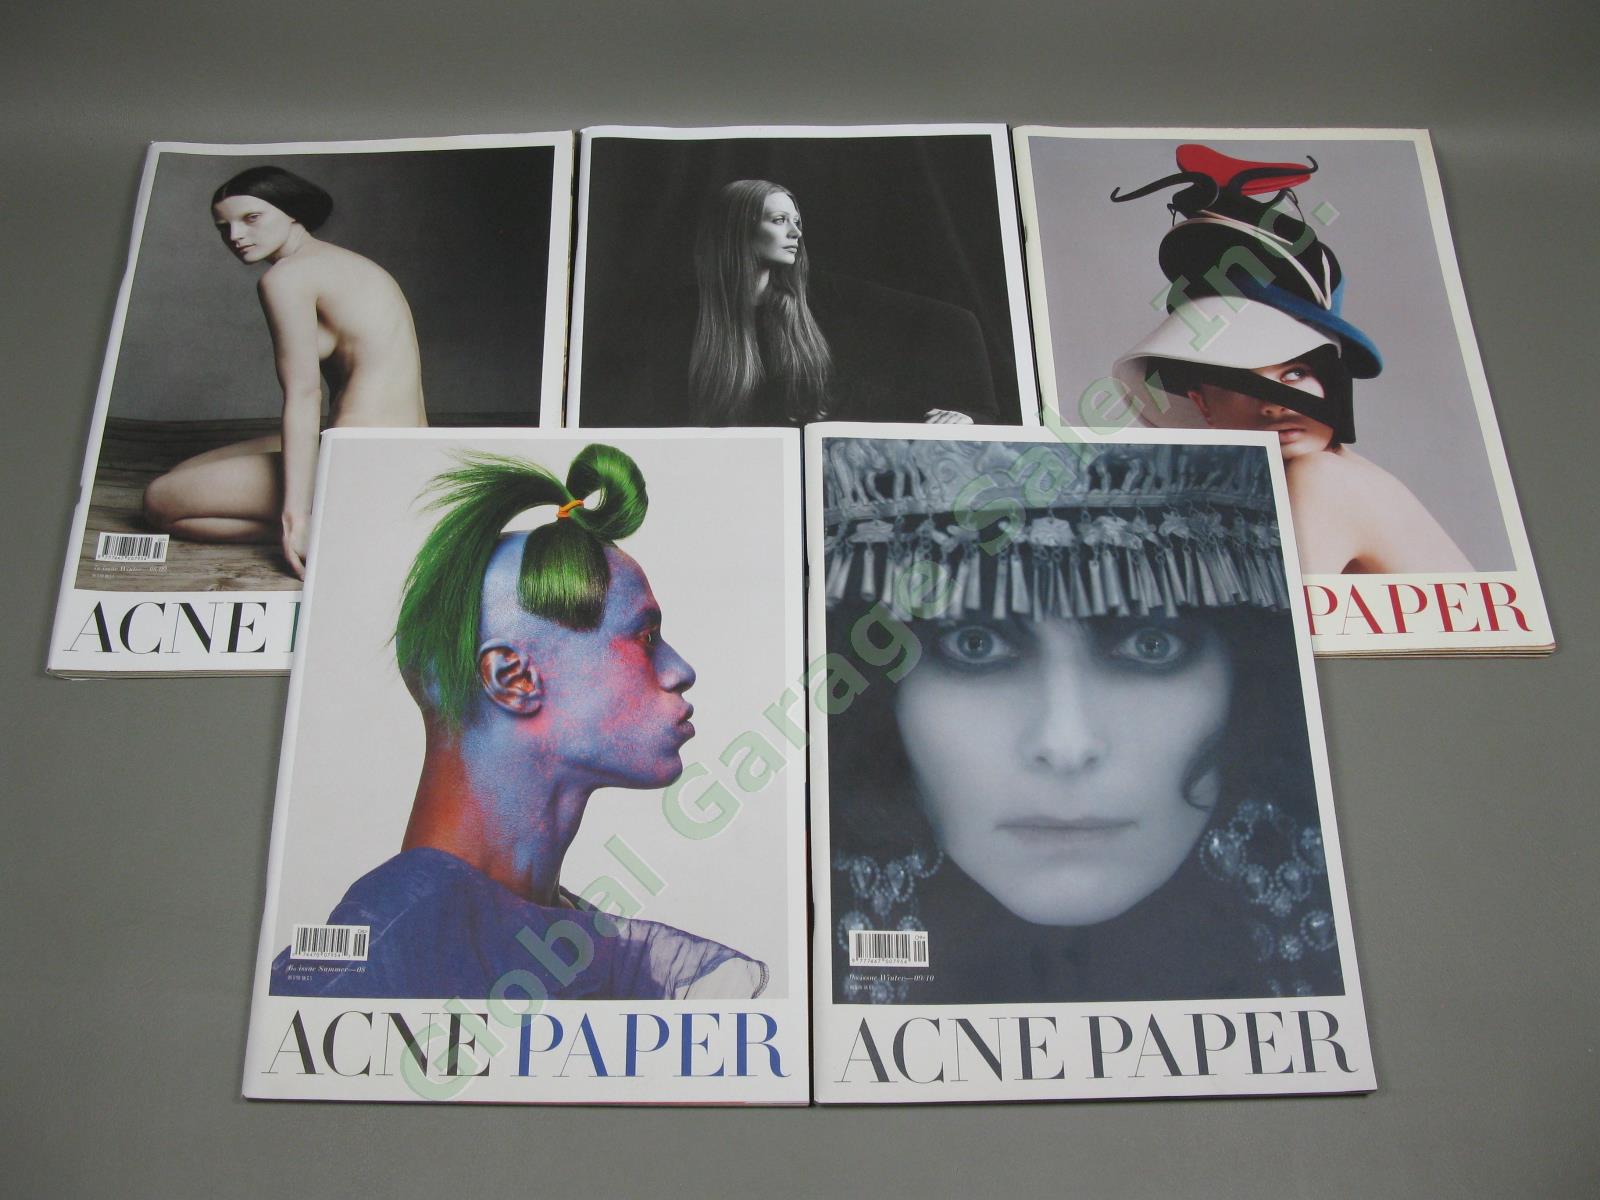 5 Acne Paper Magazines Lot 2007-2010 Issues #4-9 Photography Book Collection NR